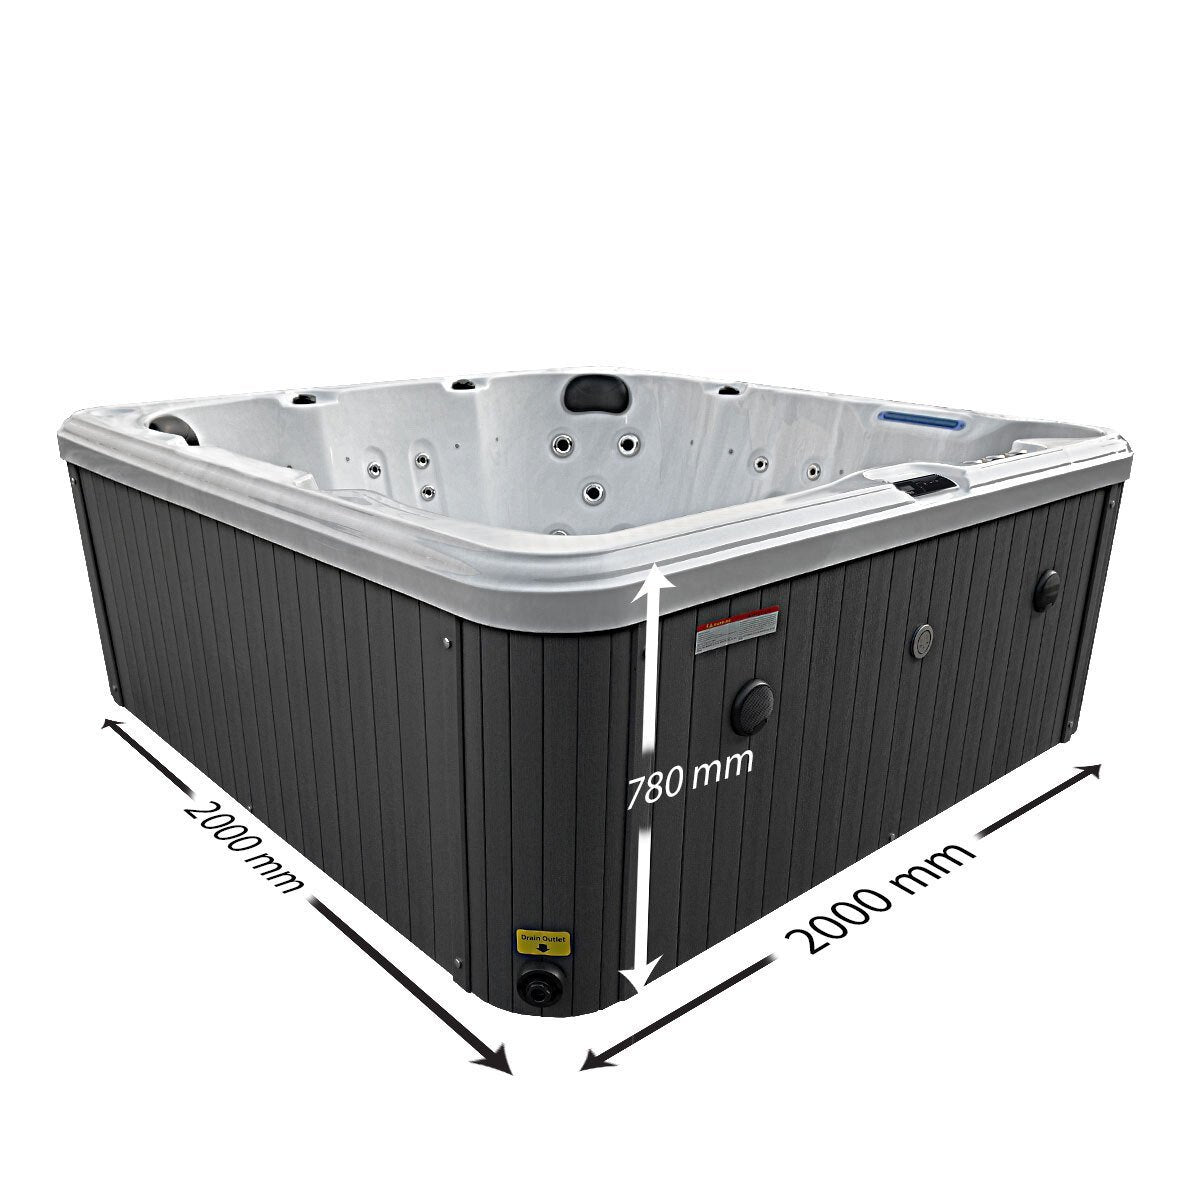 Blue Whale Spa Olive Bay 54-Jet 6 Person Hot Tub - Delivered and Installed - Signature Retail Stores